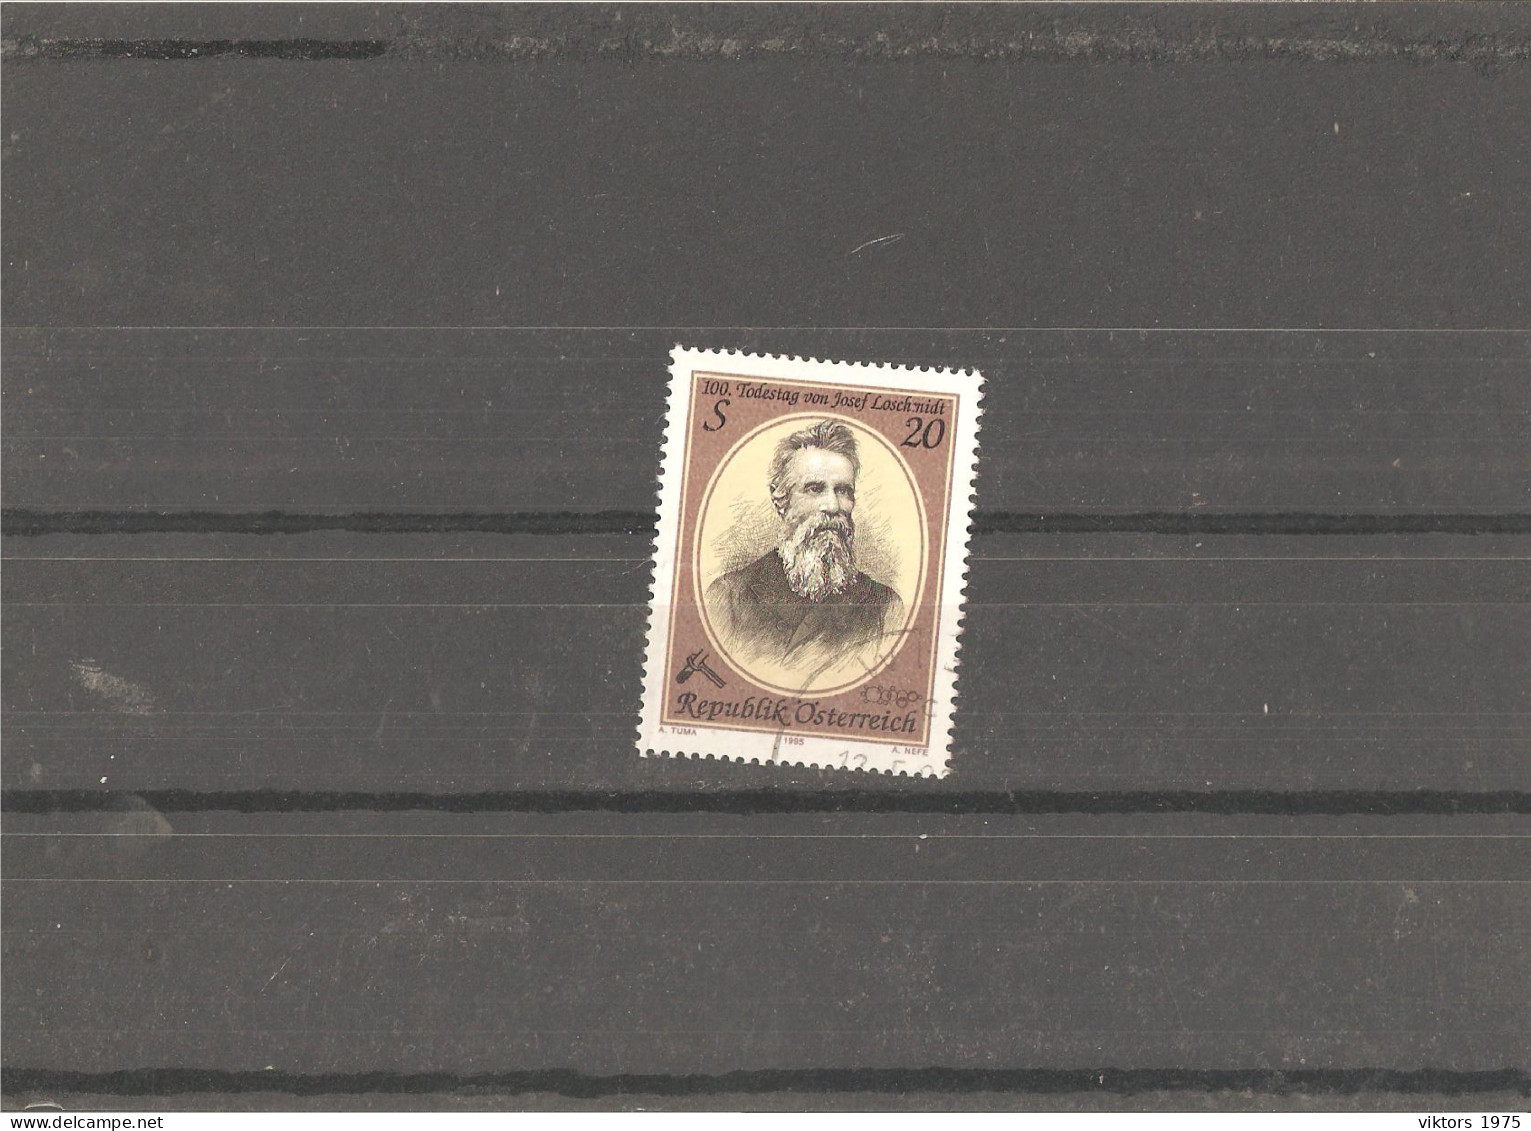 Used Stamp Nr.2163 In MICHEL Catalog - Used Stamps